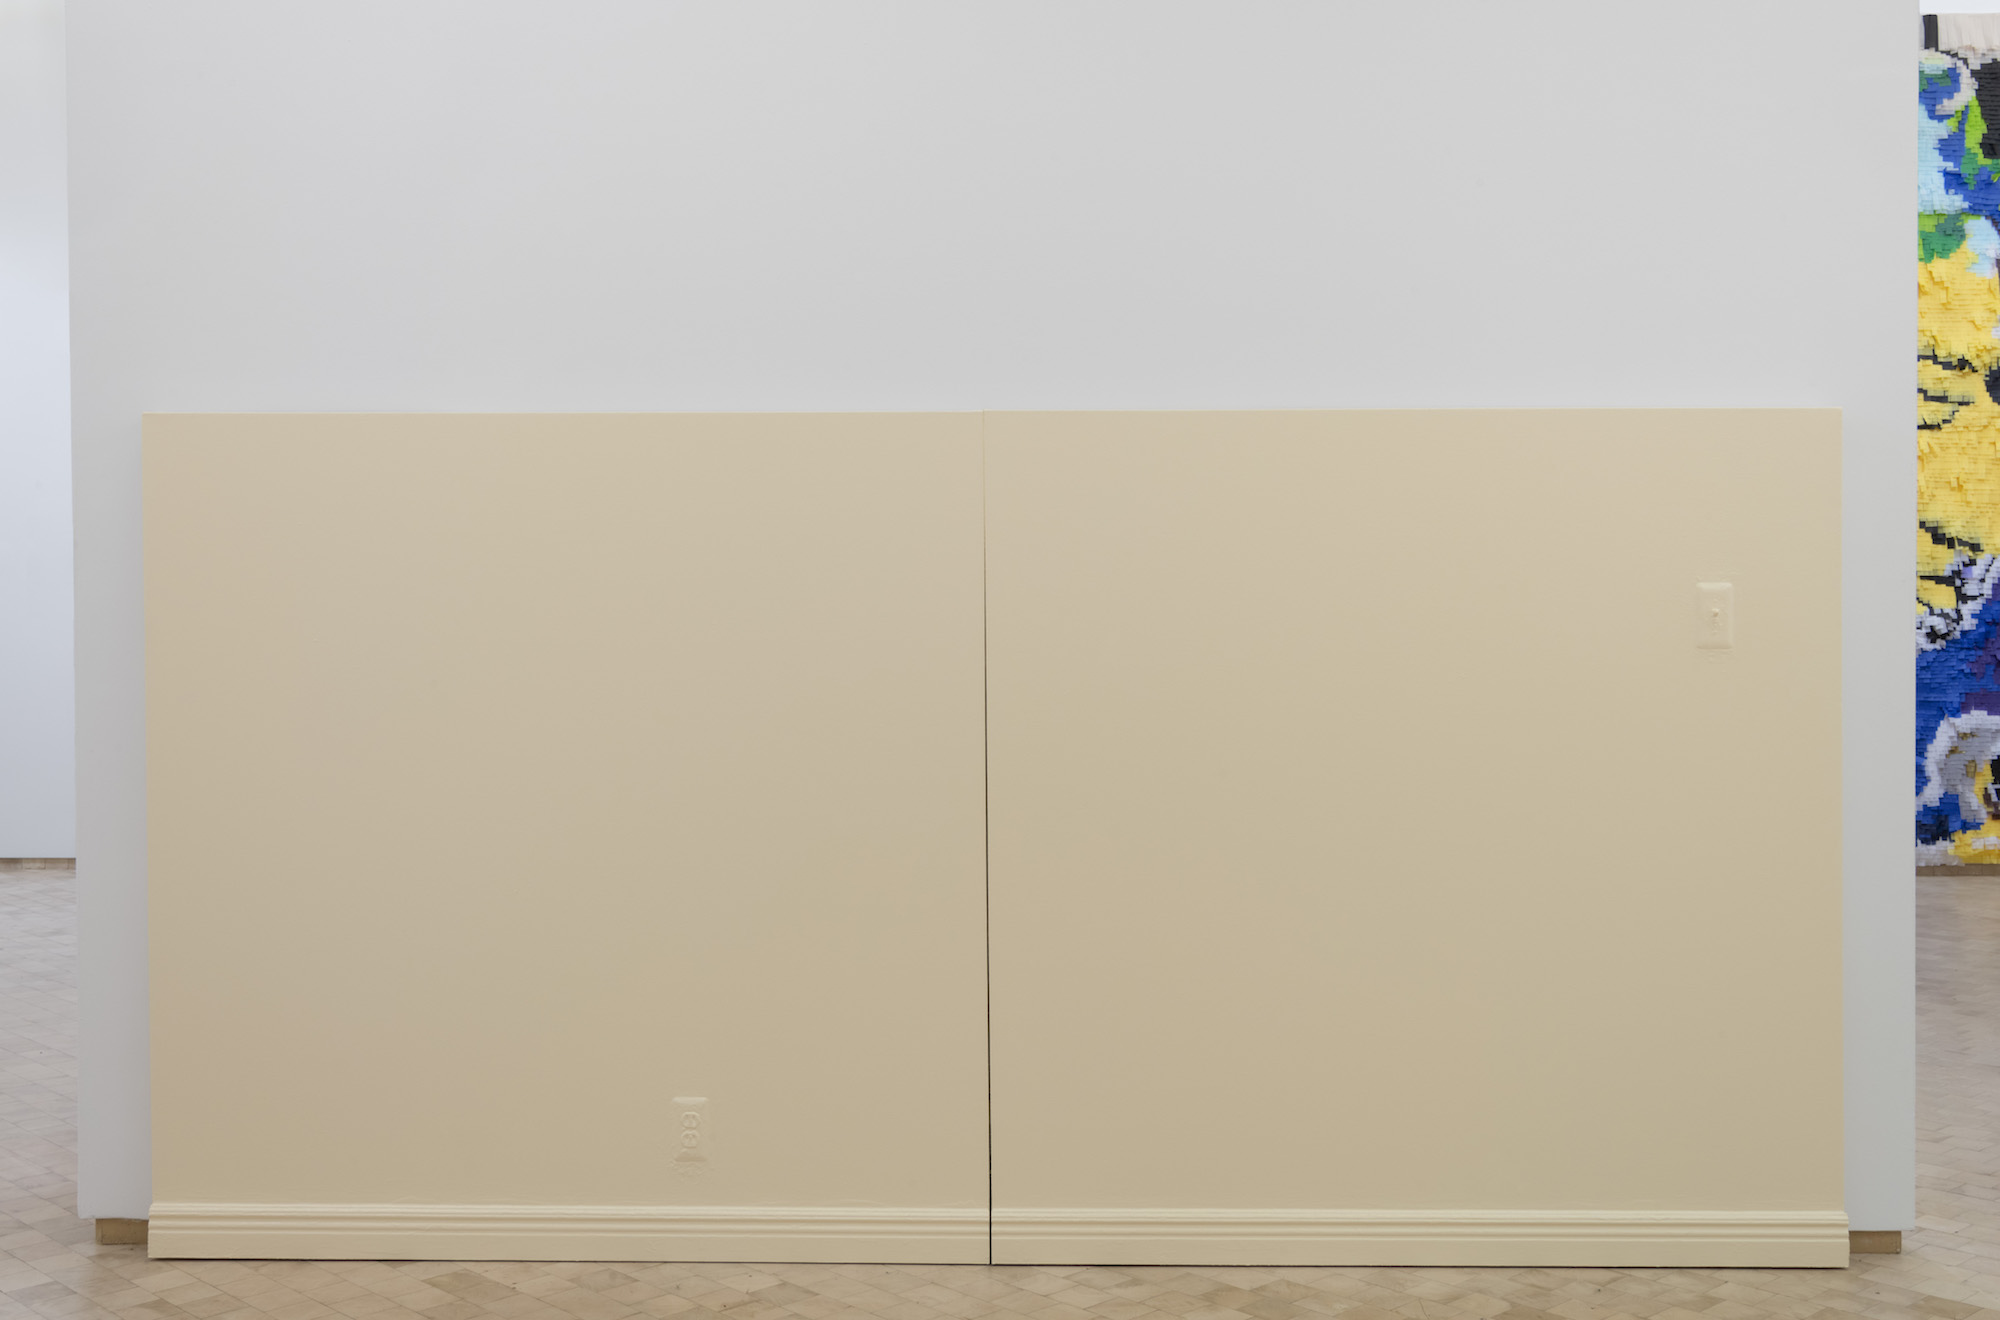 Art Installation presented against white gallery walls. A large piece of electrical wood is displayed against white gallery walls.